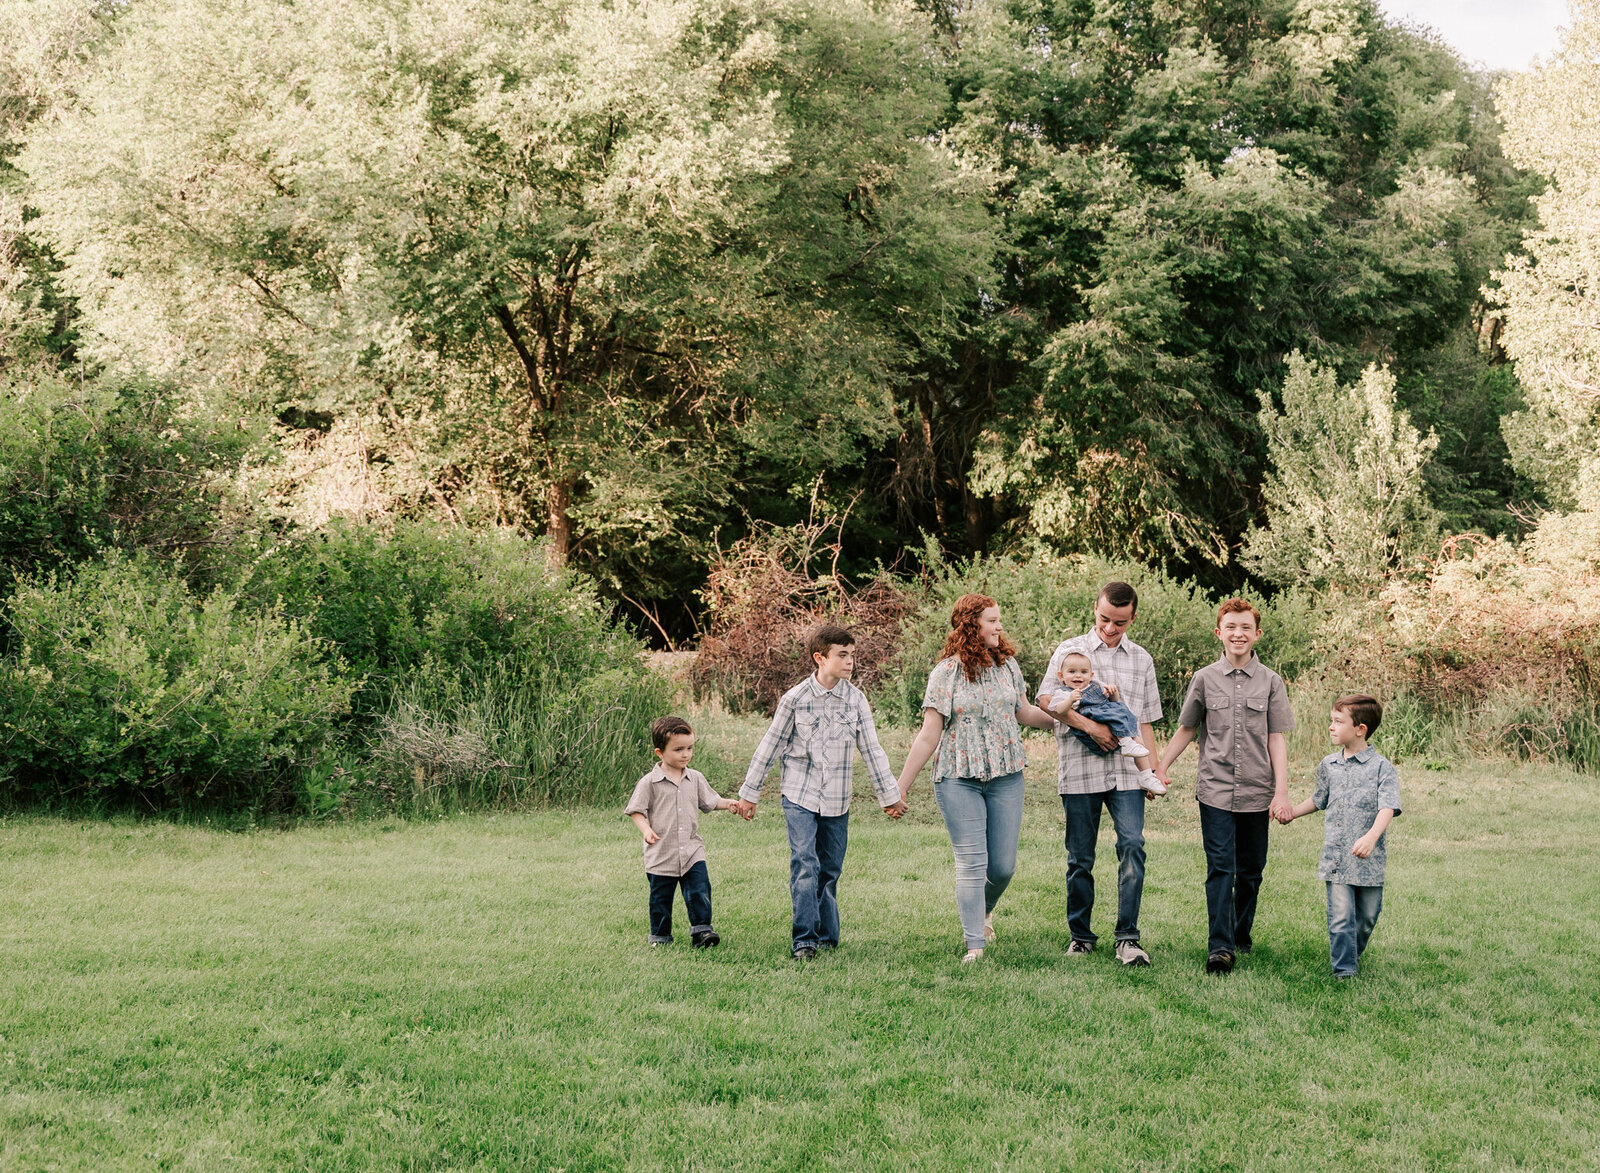 A large family of kids walk holding hands and interacting. American fork utah.